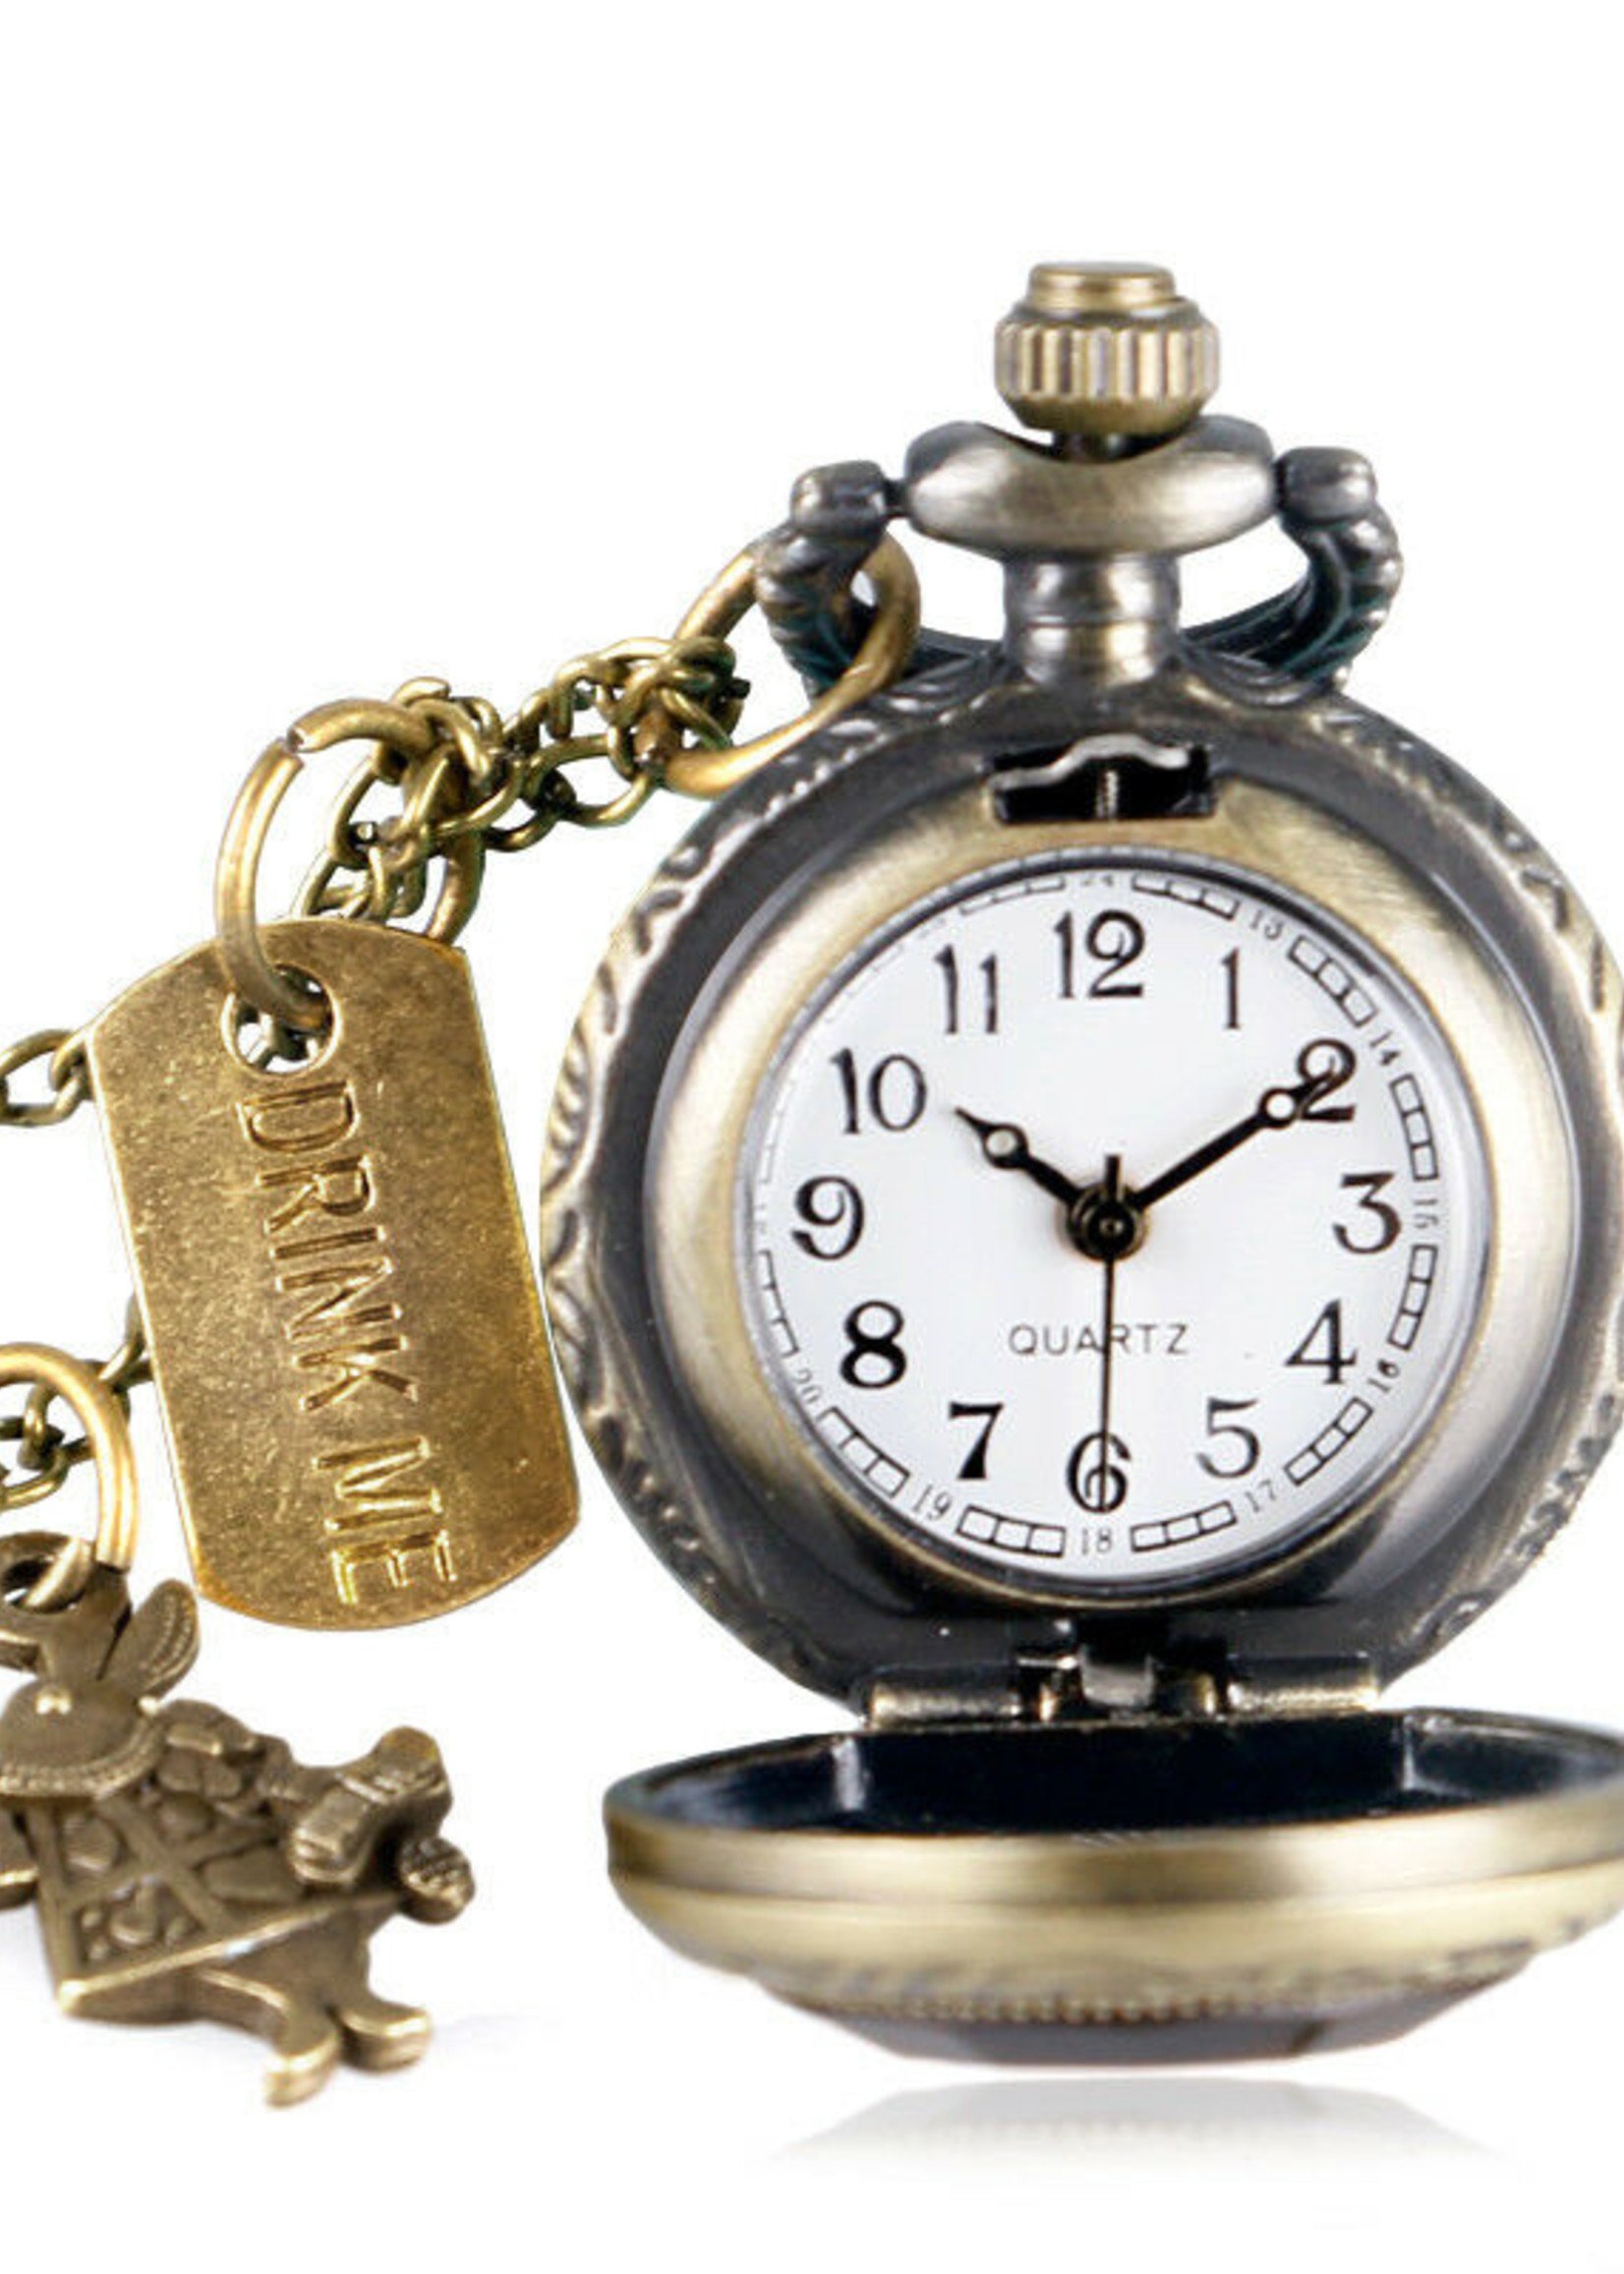 Round Antique Pocket Watch at Rs 550/piece in Moradabad | ID: 3757871633